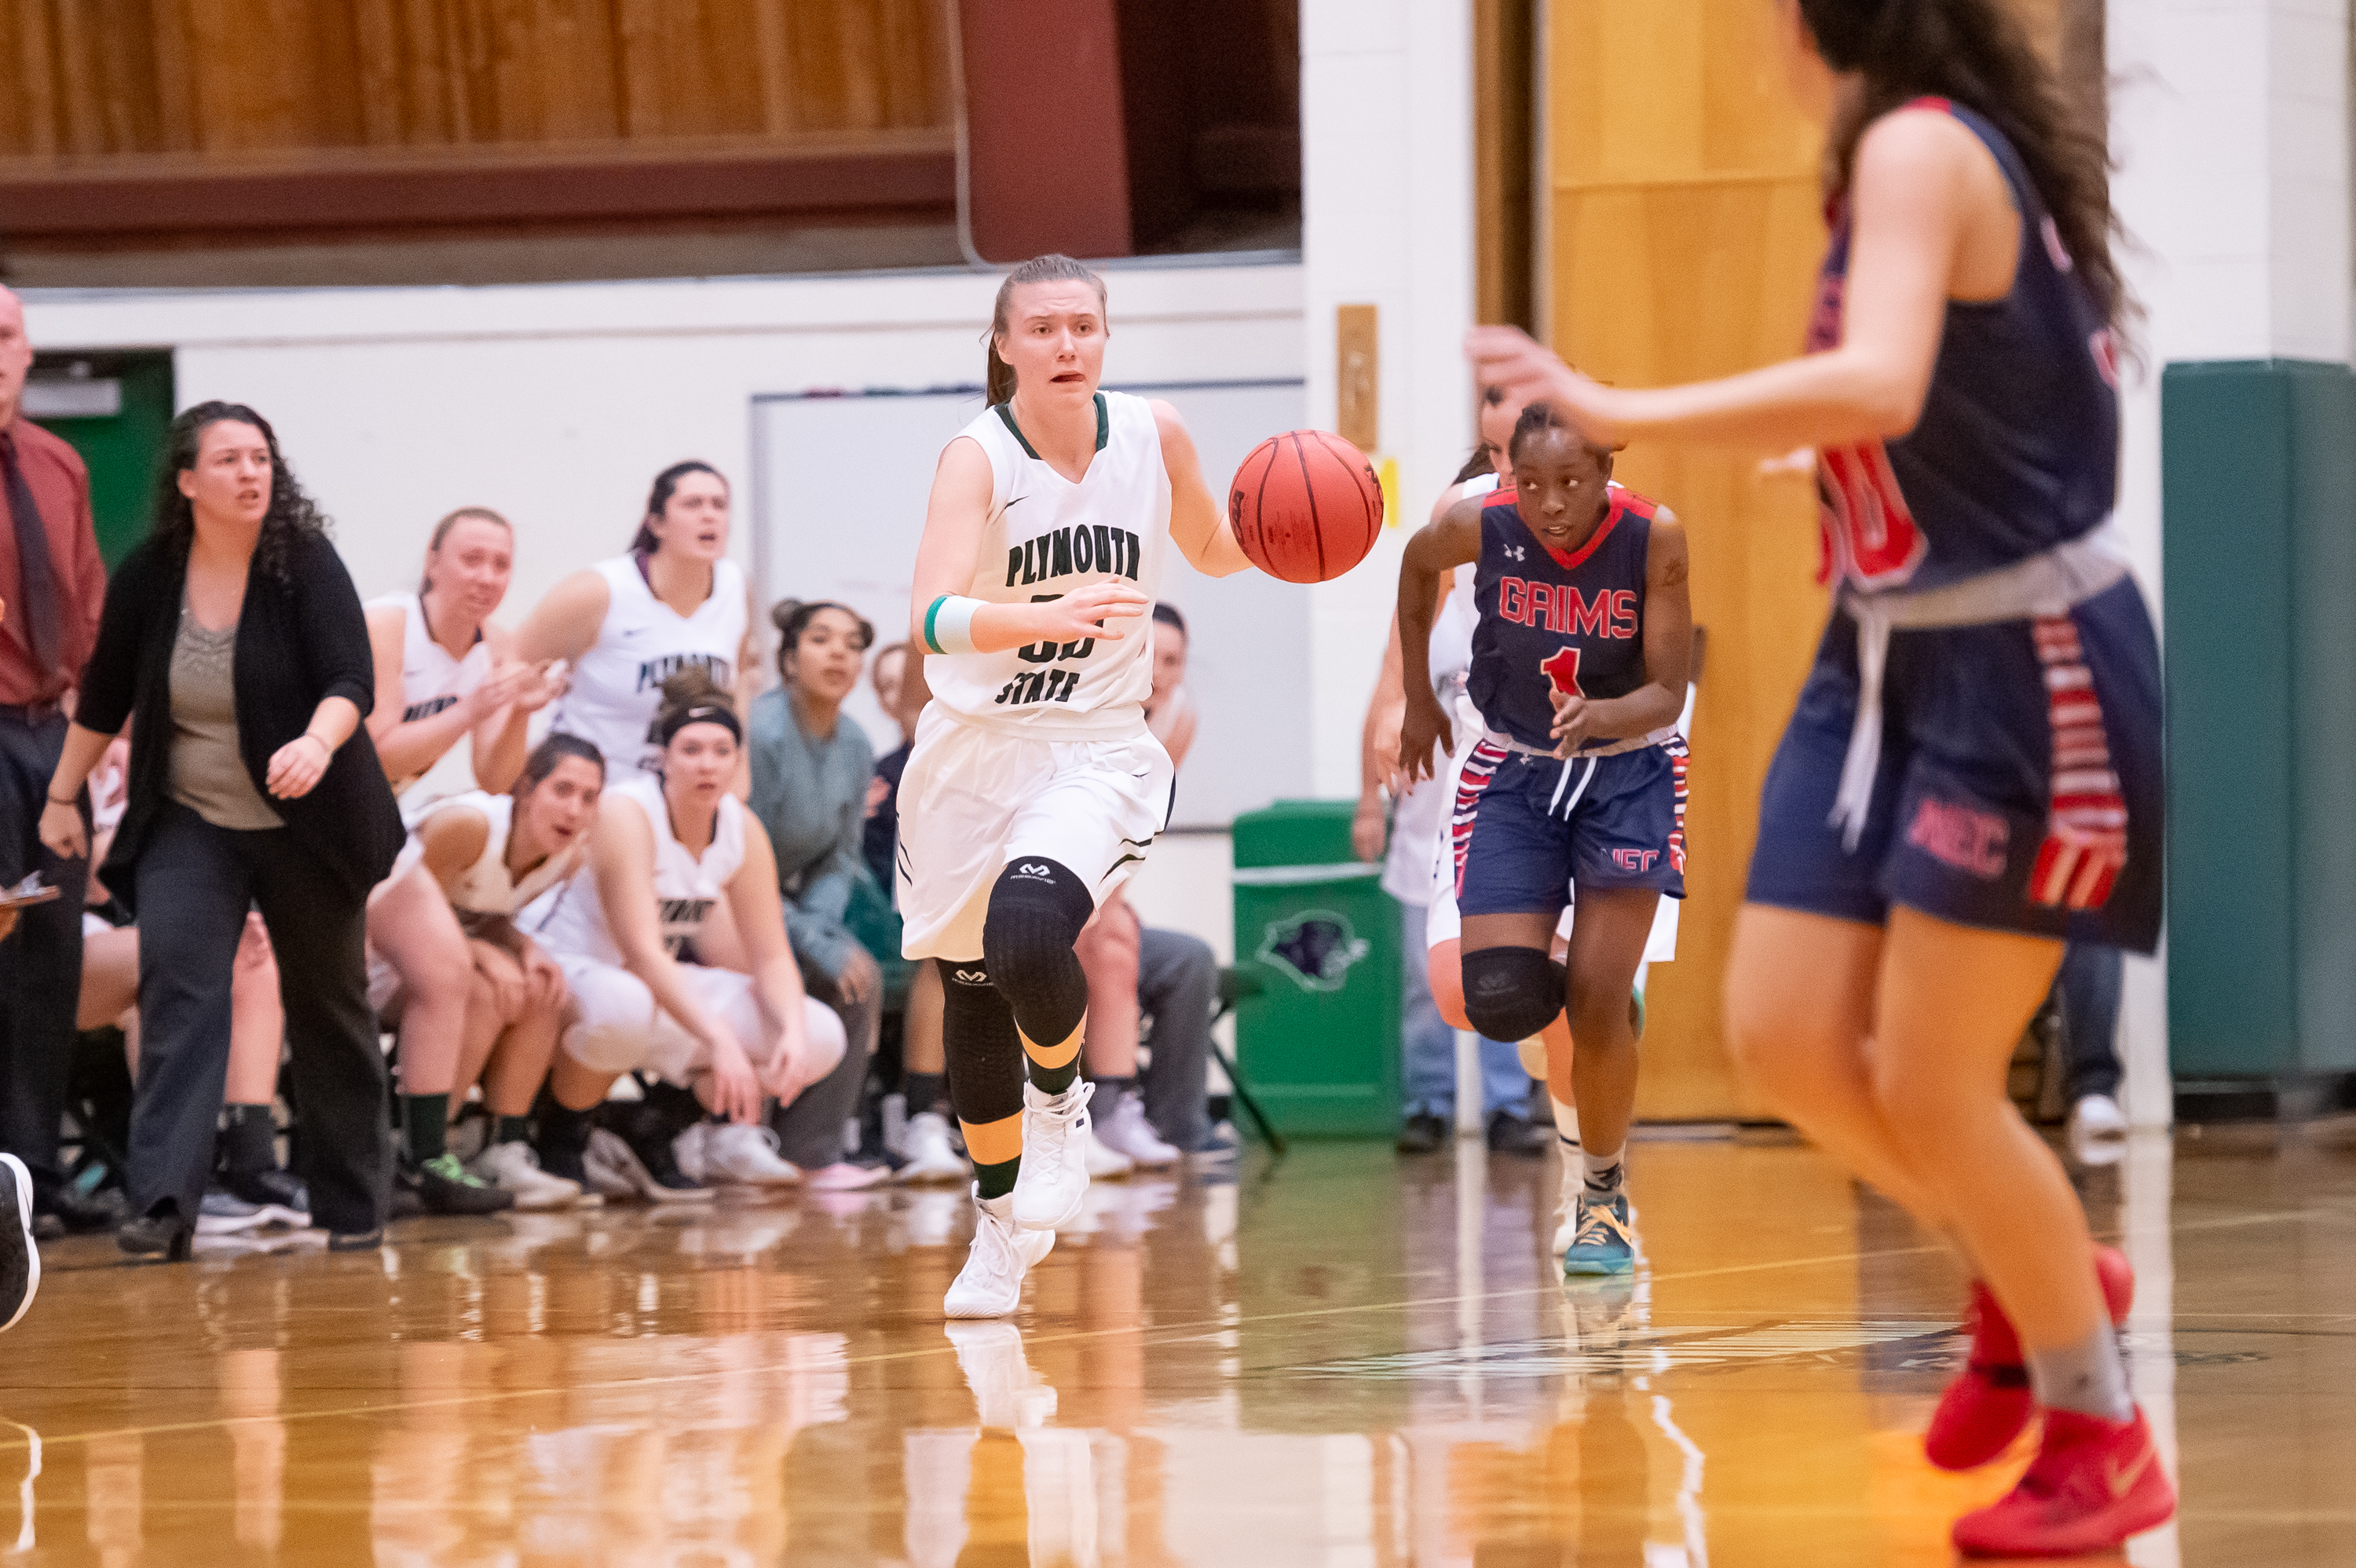 Jess Conant earned All-LEC Second Team honors in women’s basketball for the second time in her career.